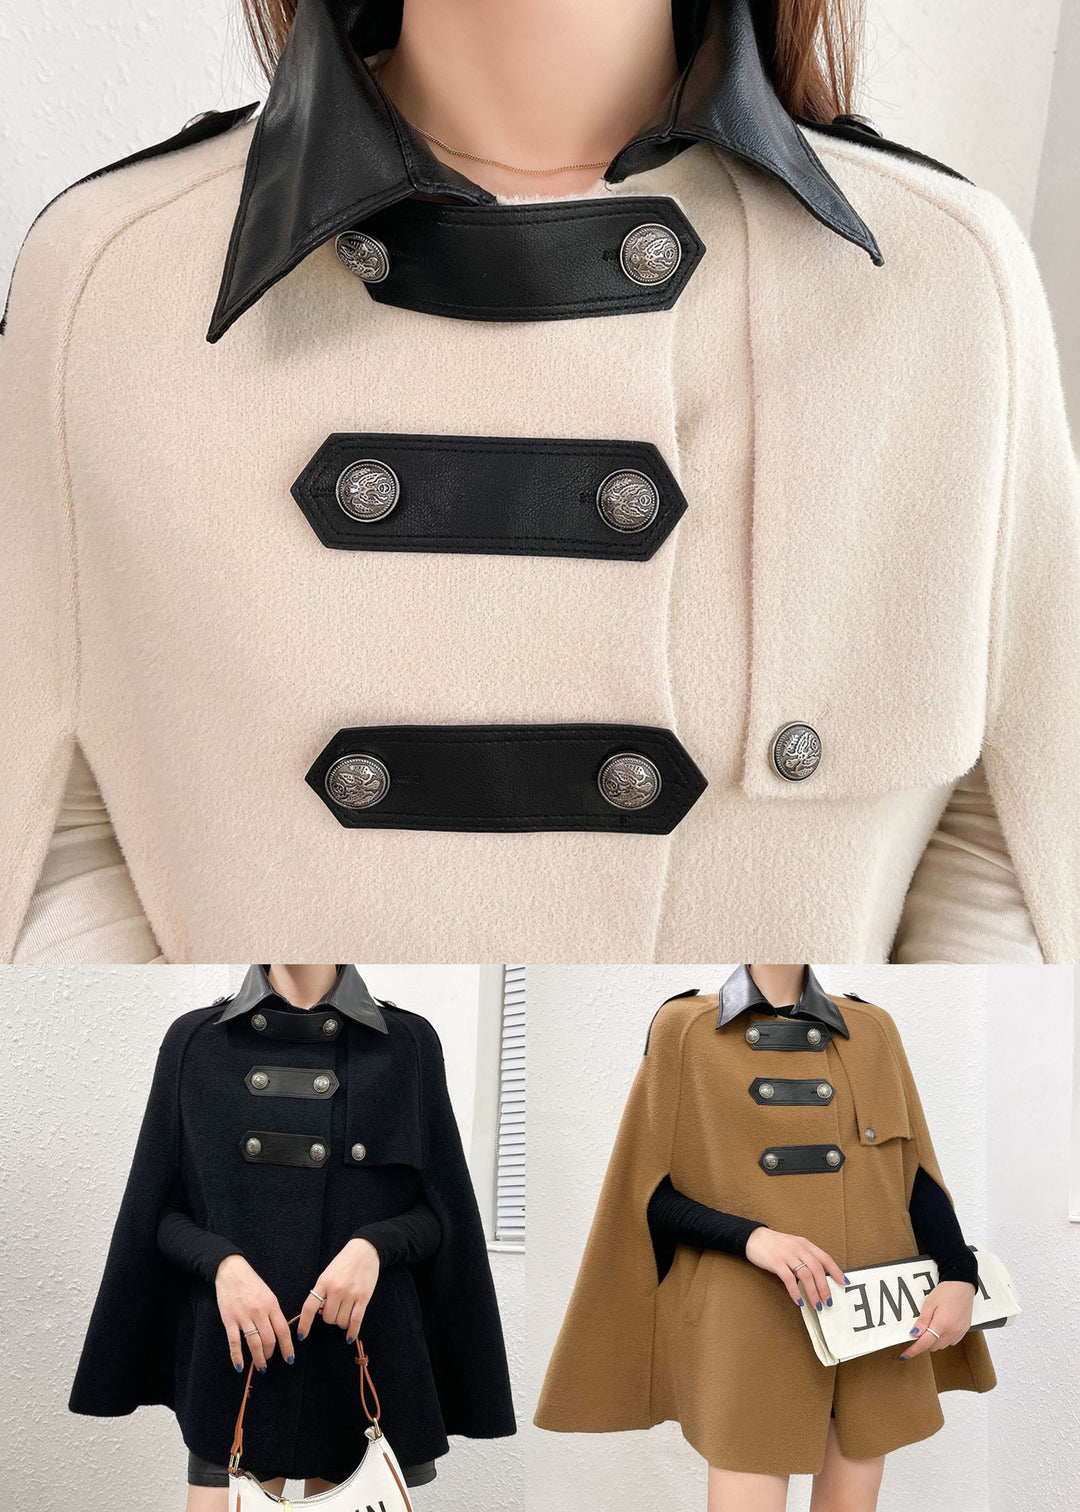 Style Beige Peter Pan Collar Faux Leather Patchwork Woolen Coats Cloak Sleeves